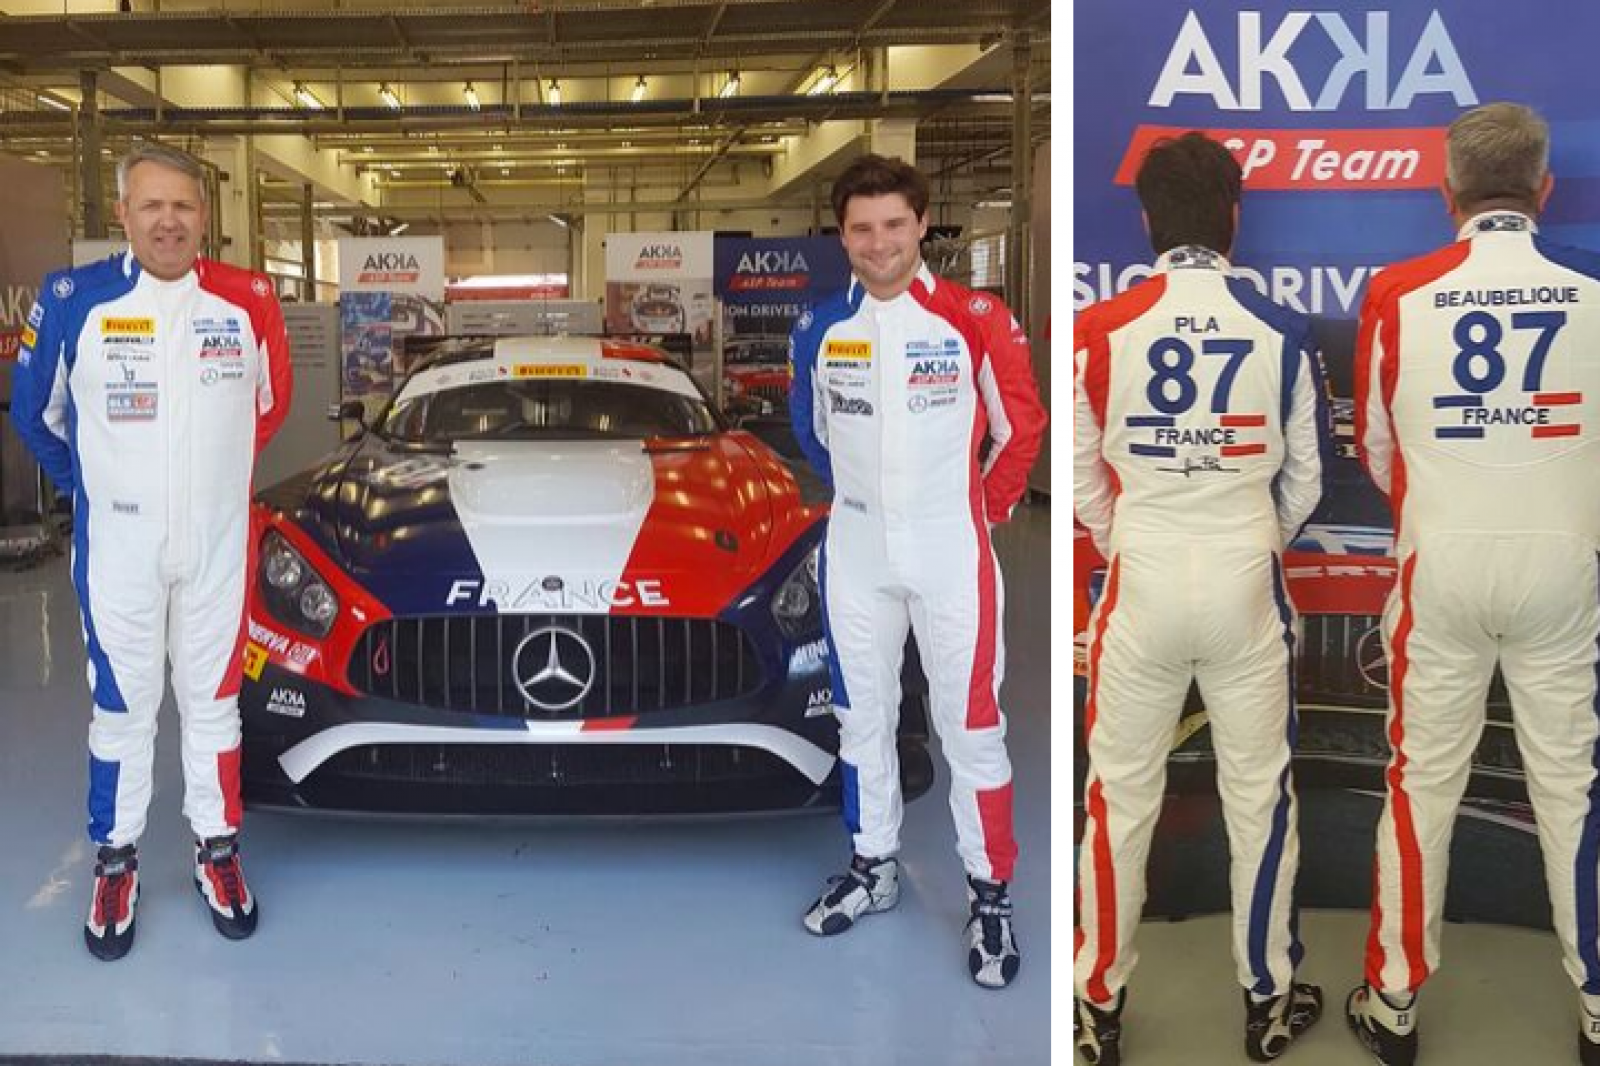 Team France confirms Beaubelique and Pla for GT Cup assault with Mercedes-AMG